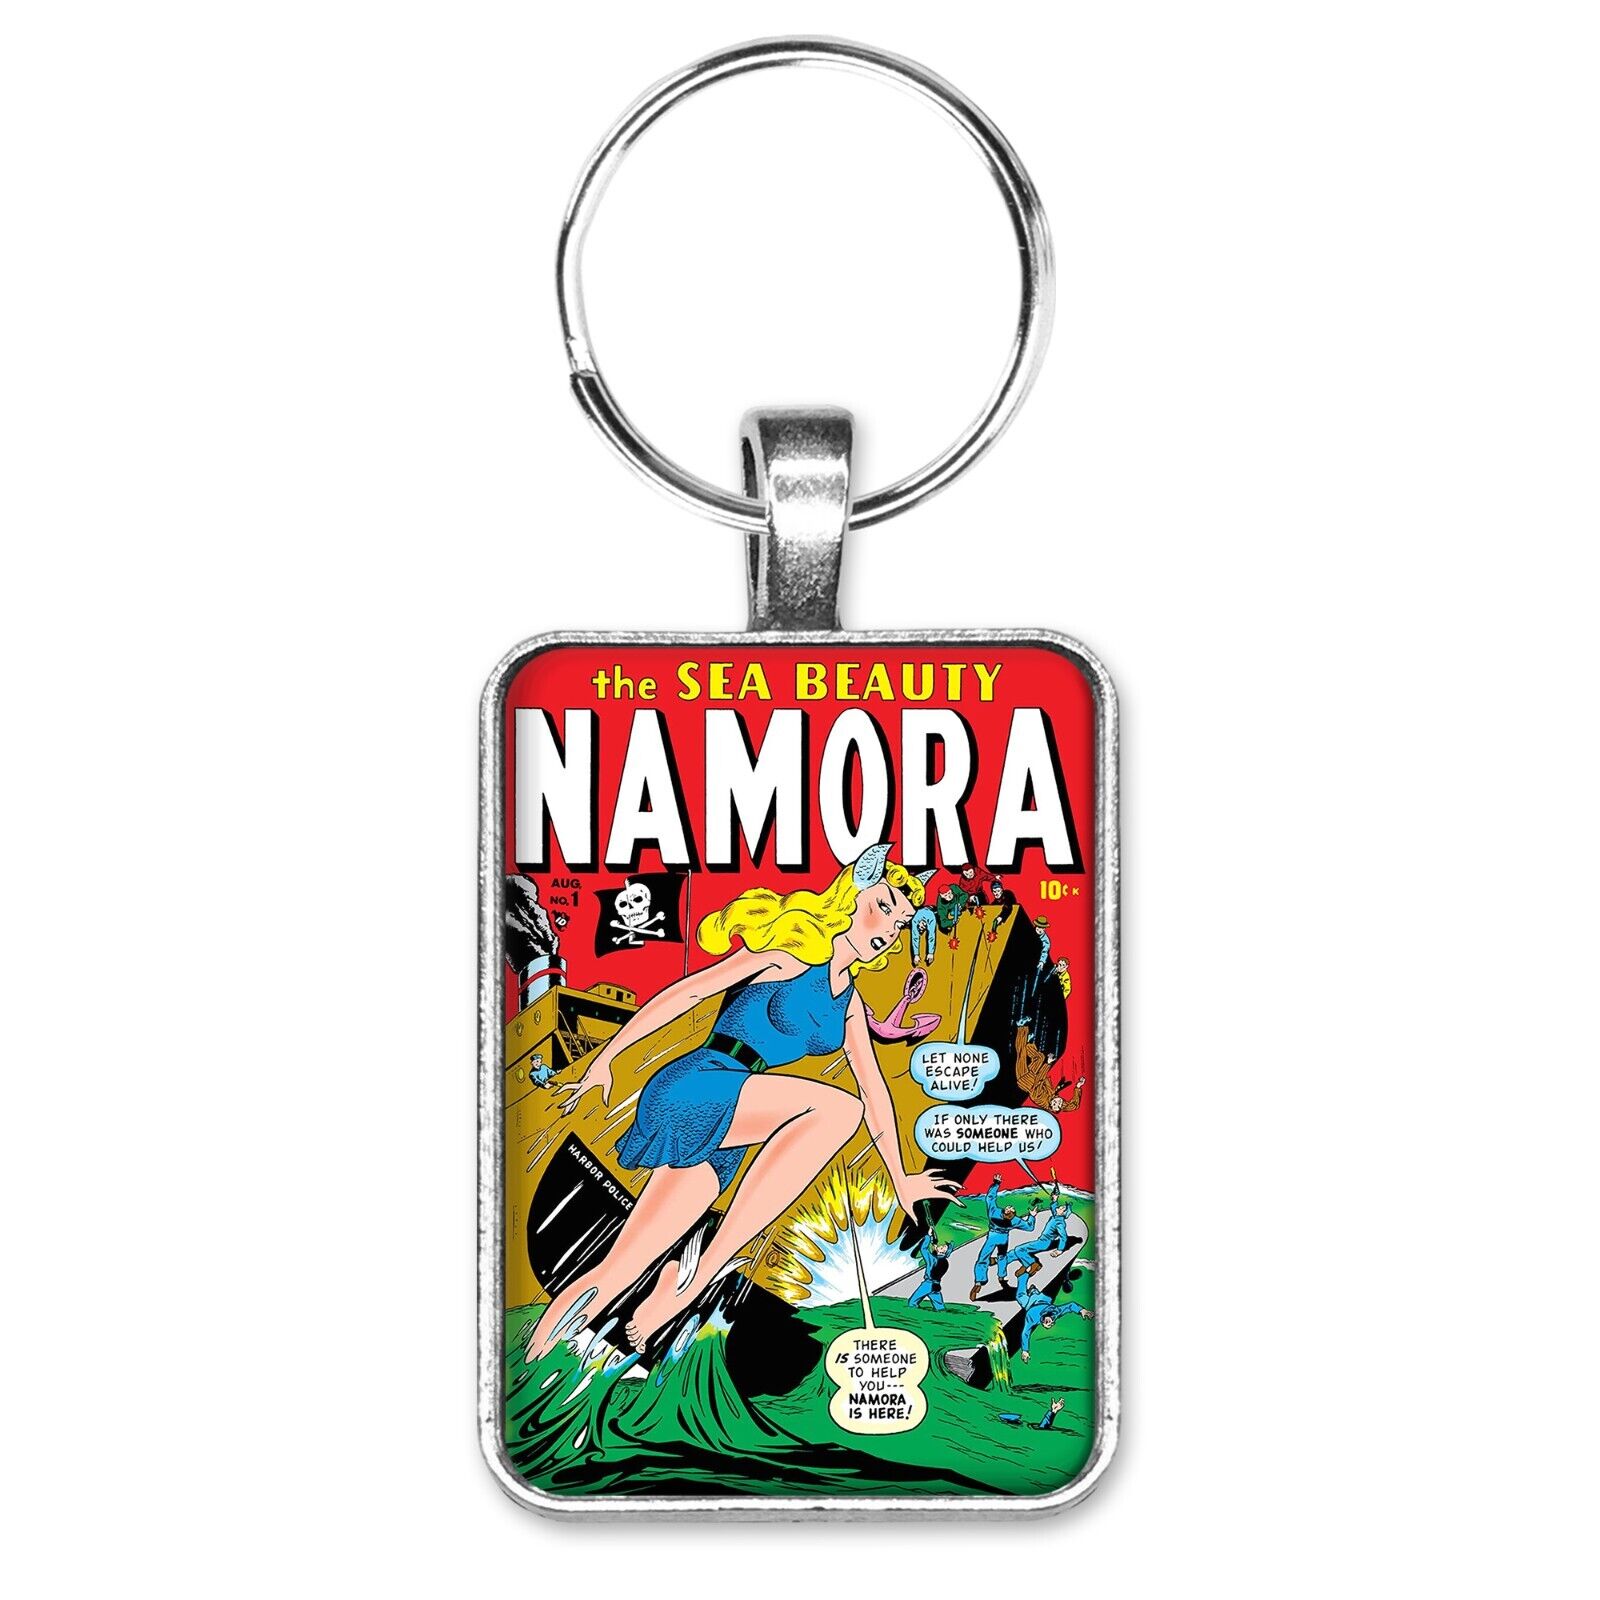 Namora the Sea Beauty #1 Cover Key Ring or Necklace Classic Comic Book Jewelry